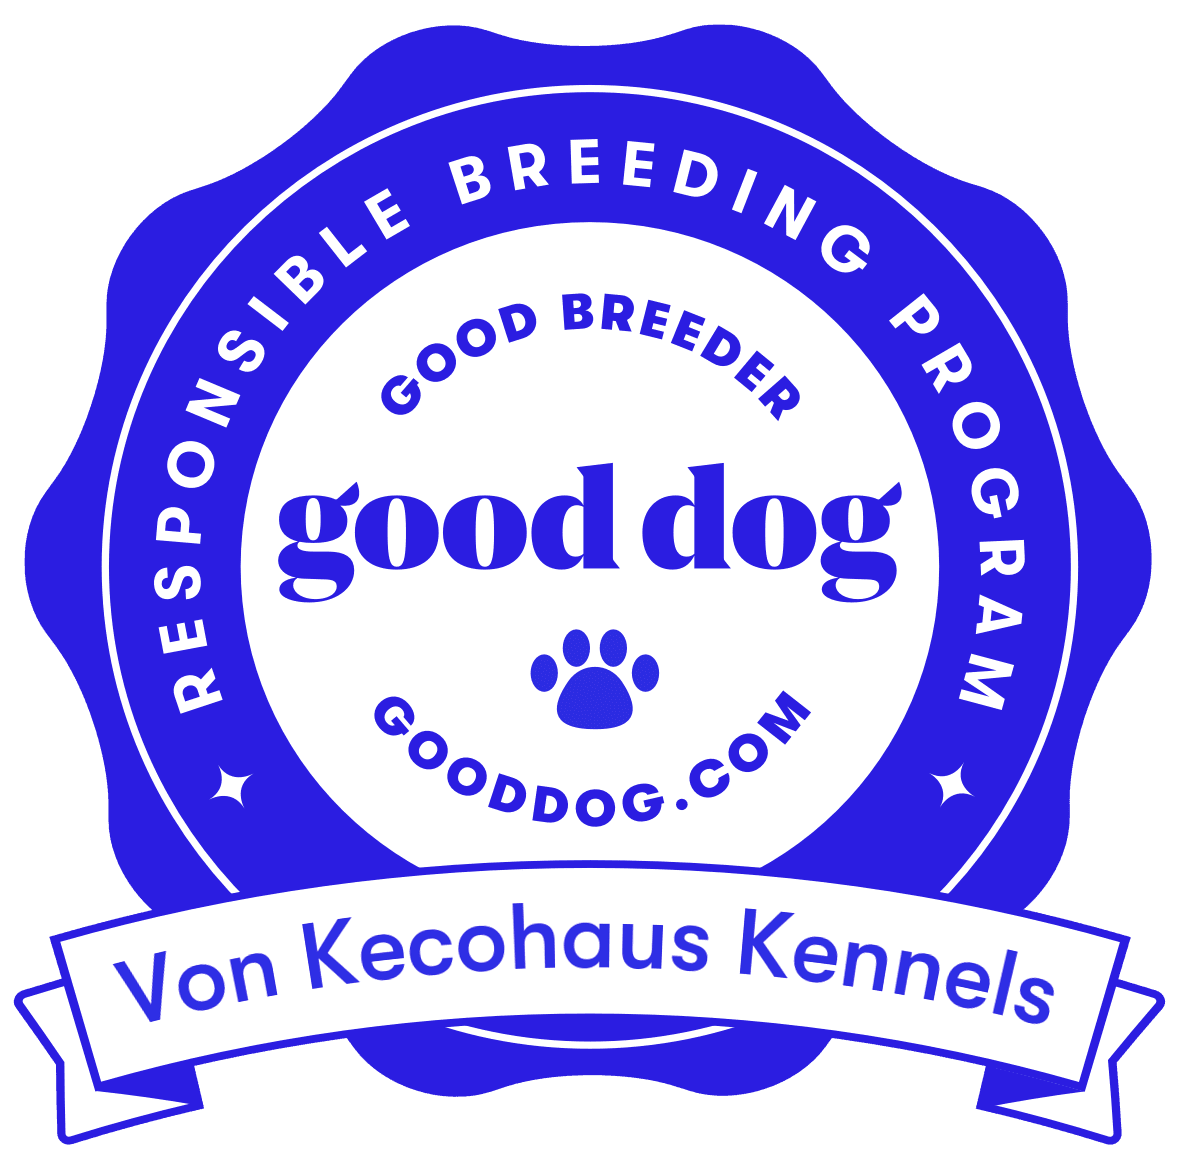 K9 Special Services (all breeds dog training)